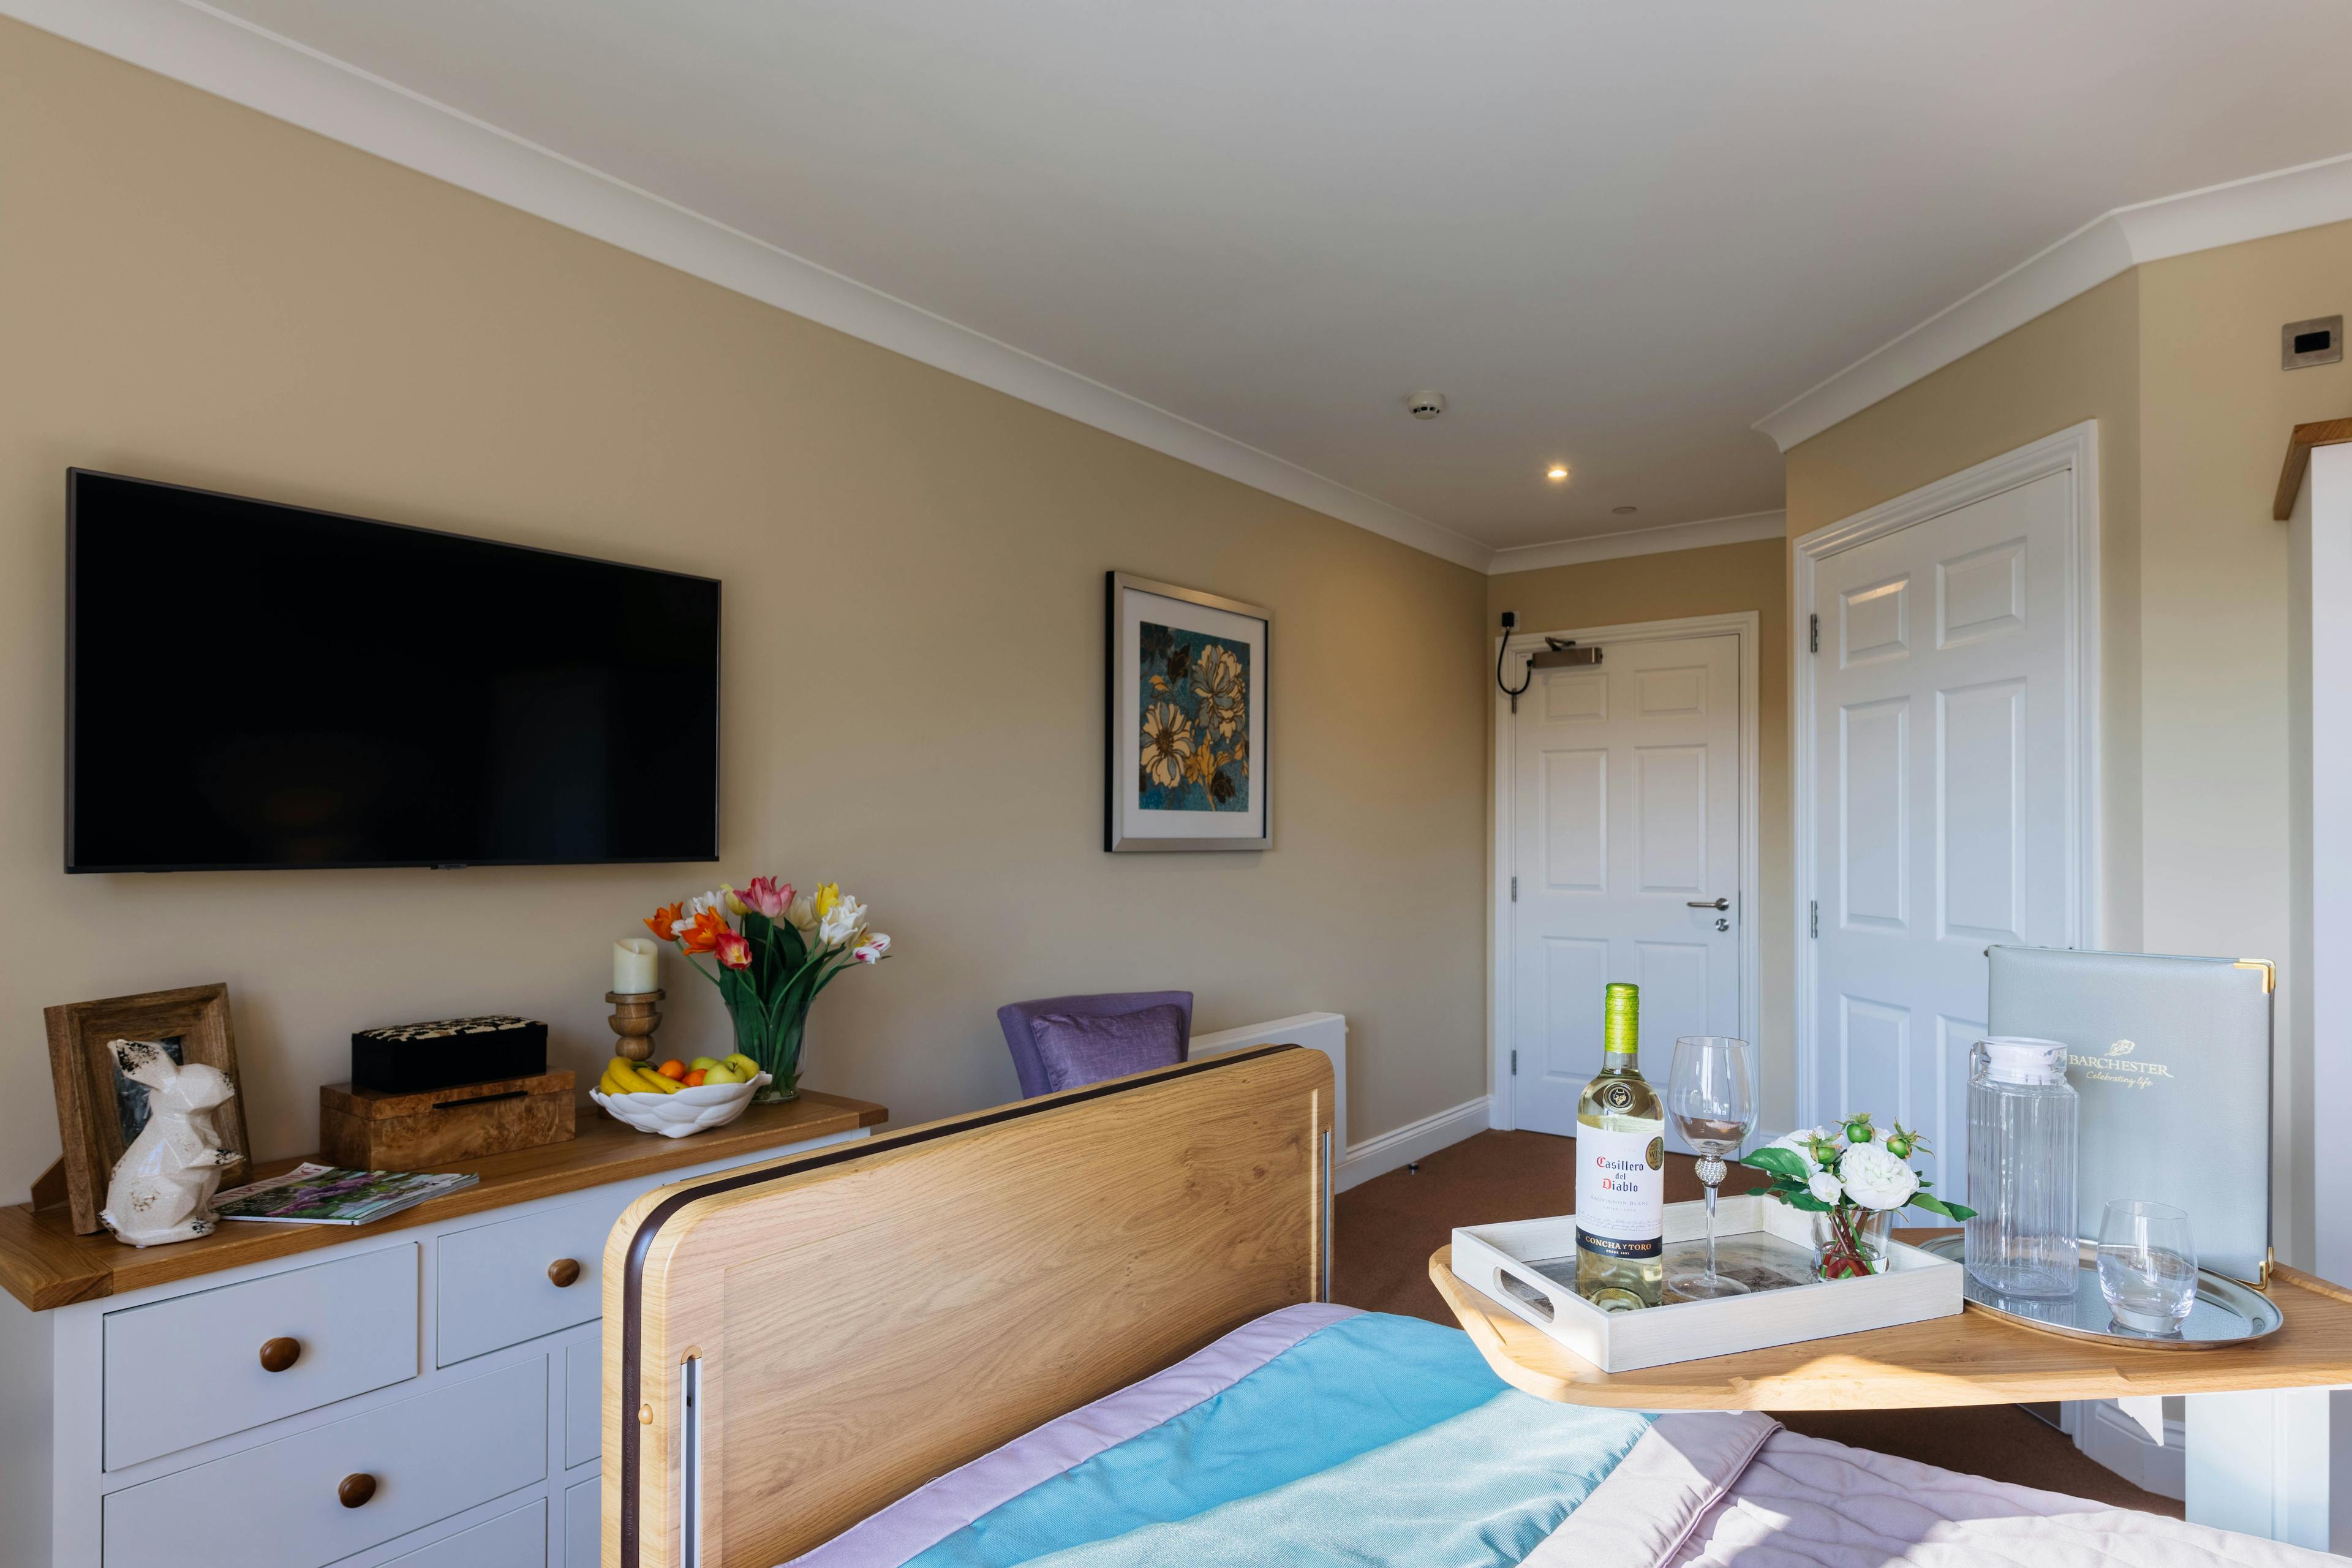 Tv Point at Snowdrop Place Care Home in Southampton, Hampshire